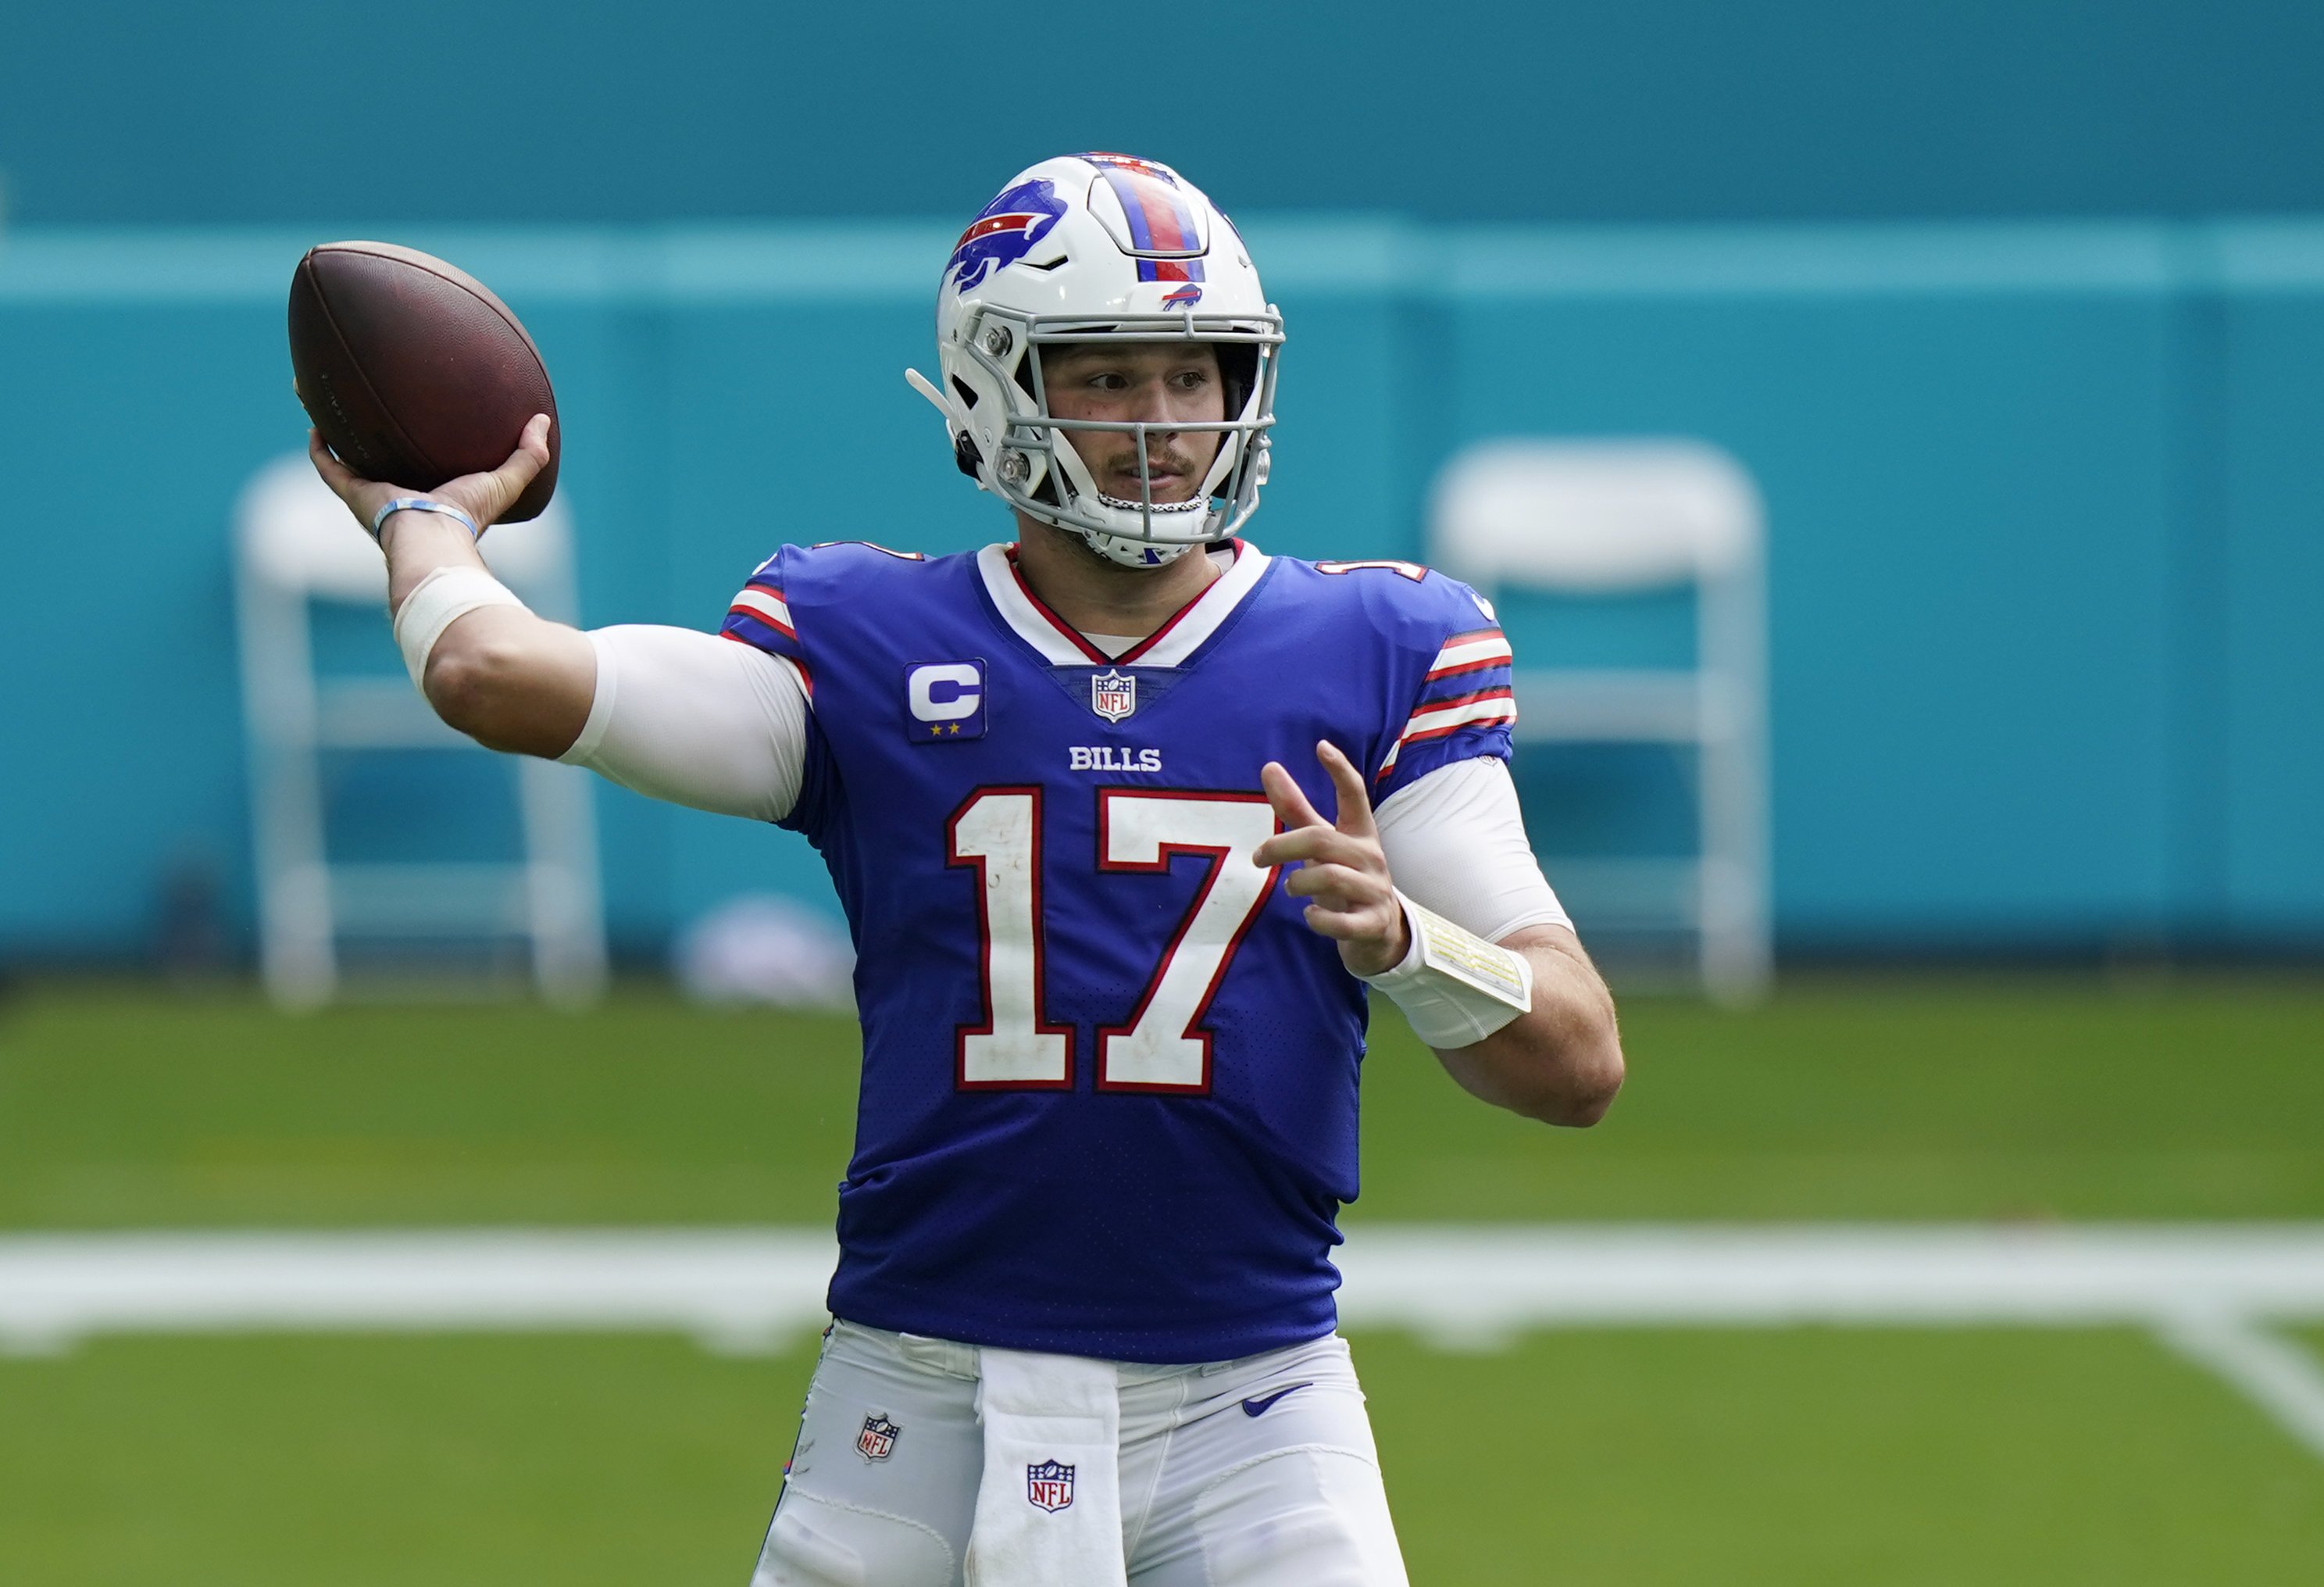 Ranking the top 10 quarterbacks age 24 and under in the NFL